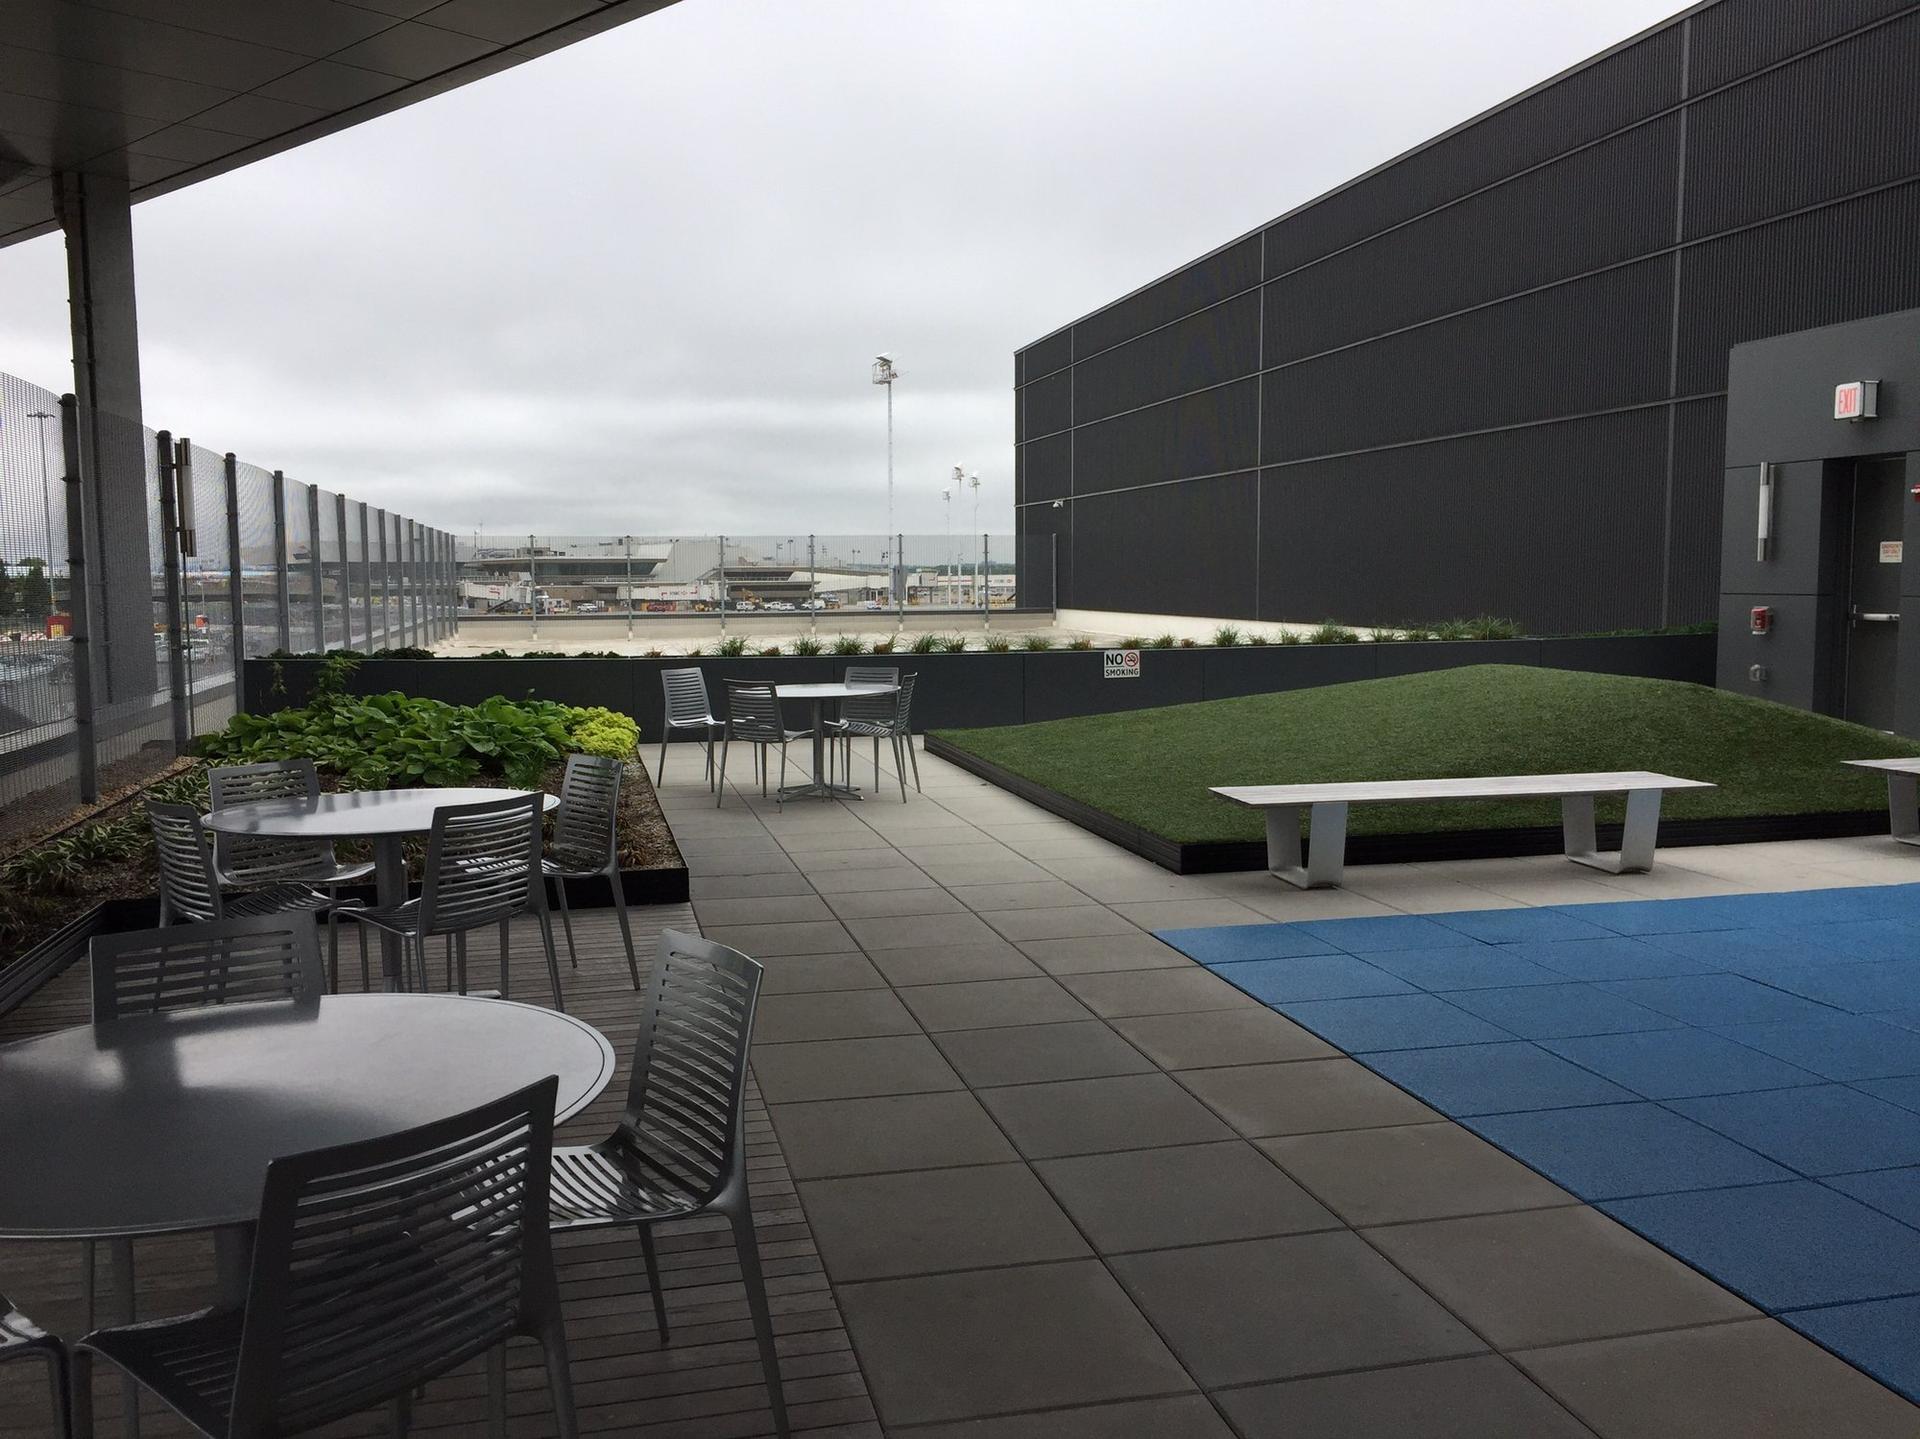 JetBlue Rooftop Terrace image 17 of 22